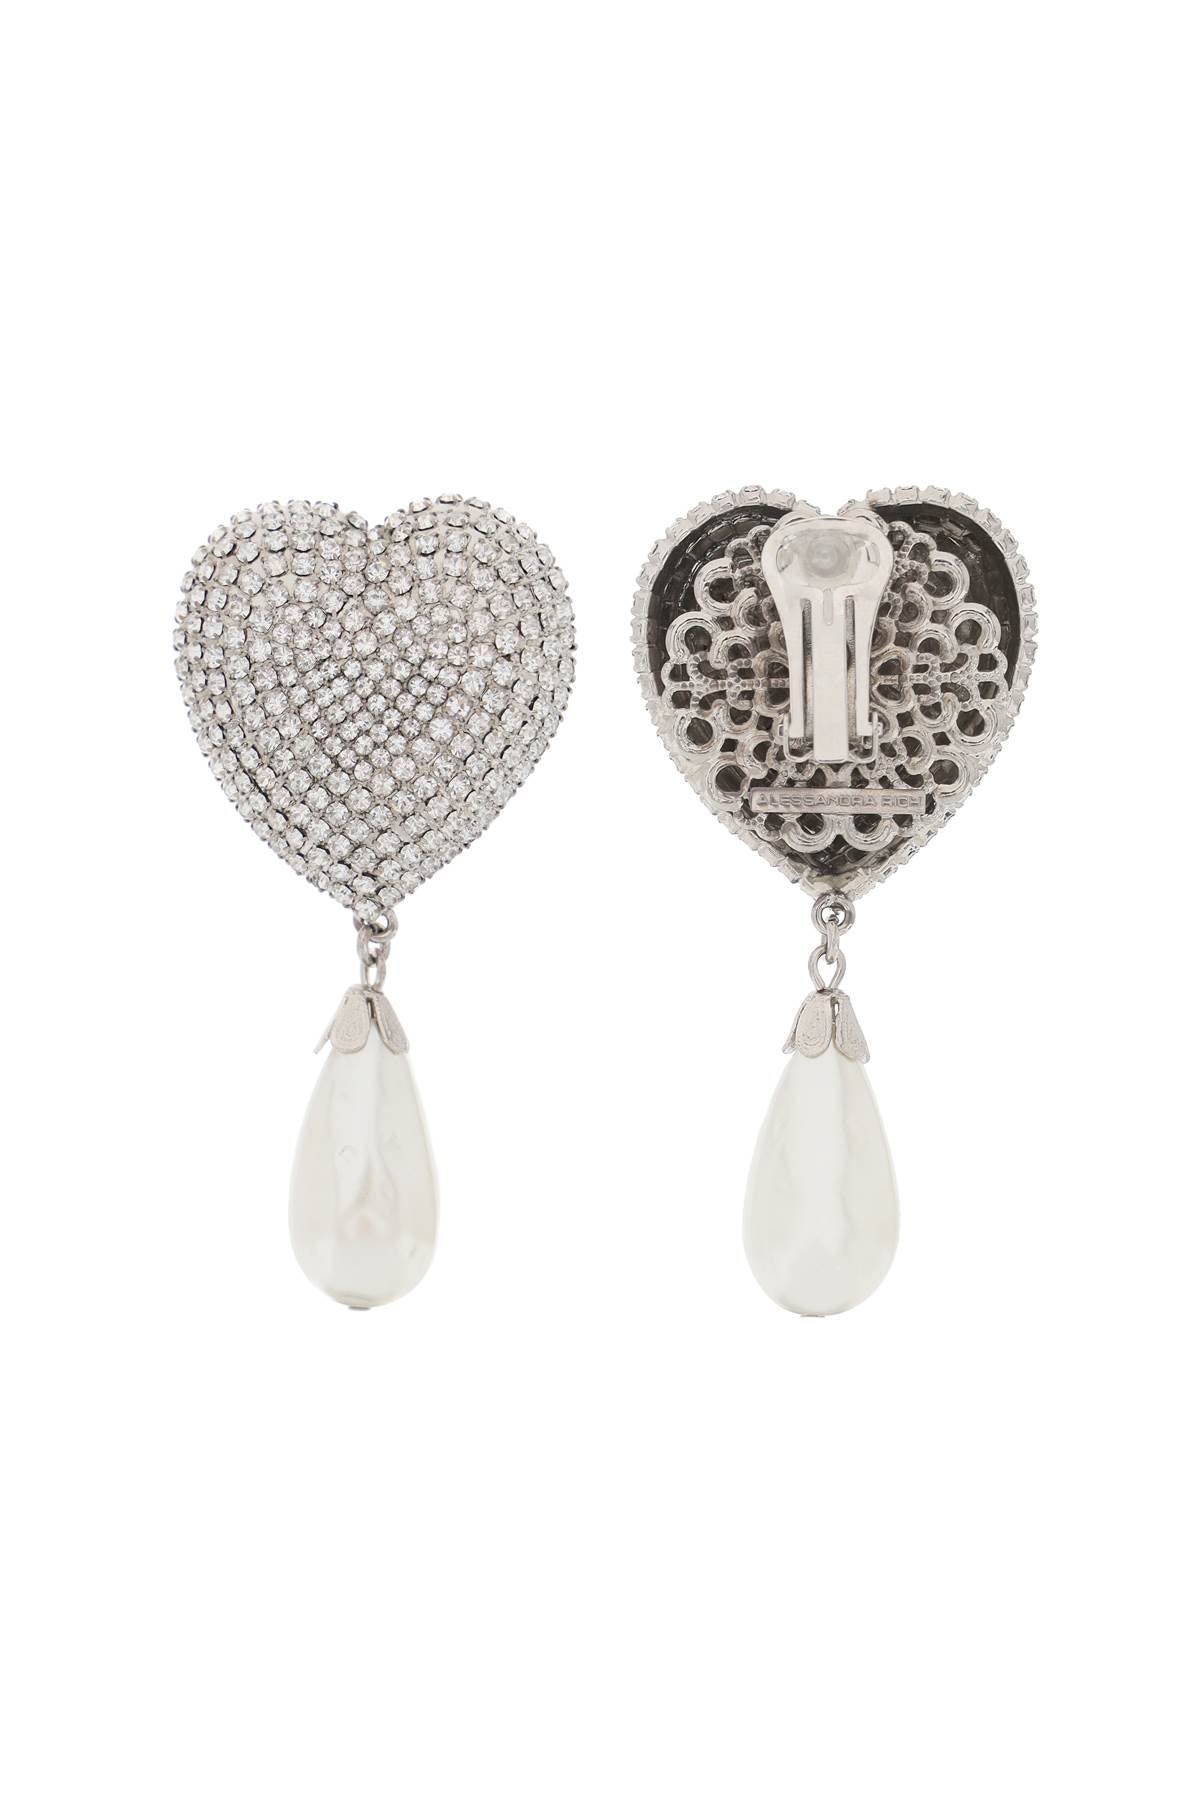 Alessandra Rich Alessandra rich heart crystal earrings with pearls